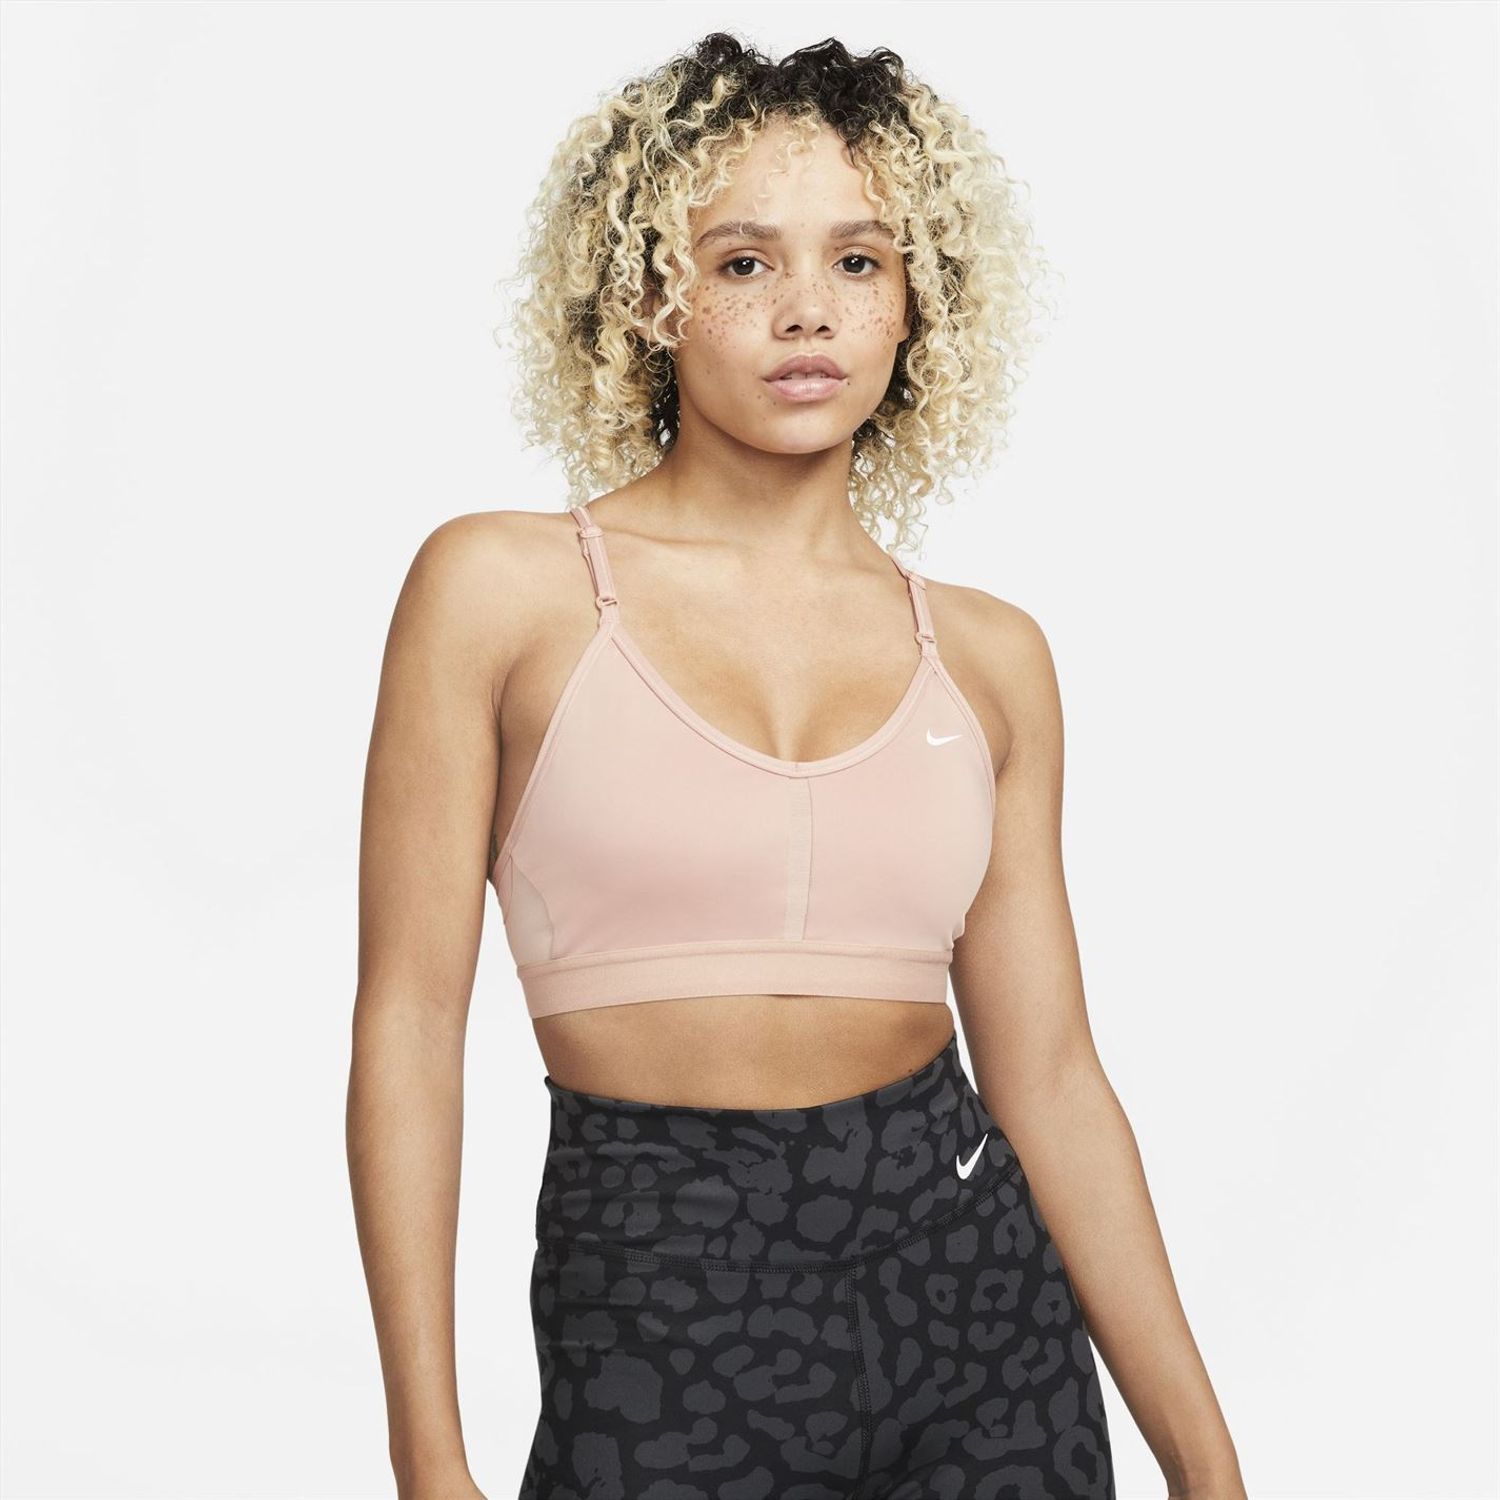 Pink Nike Womens Indy Light Support Logo Sports Bra - Get The Label